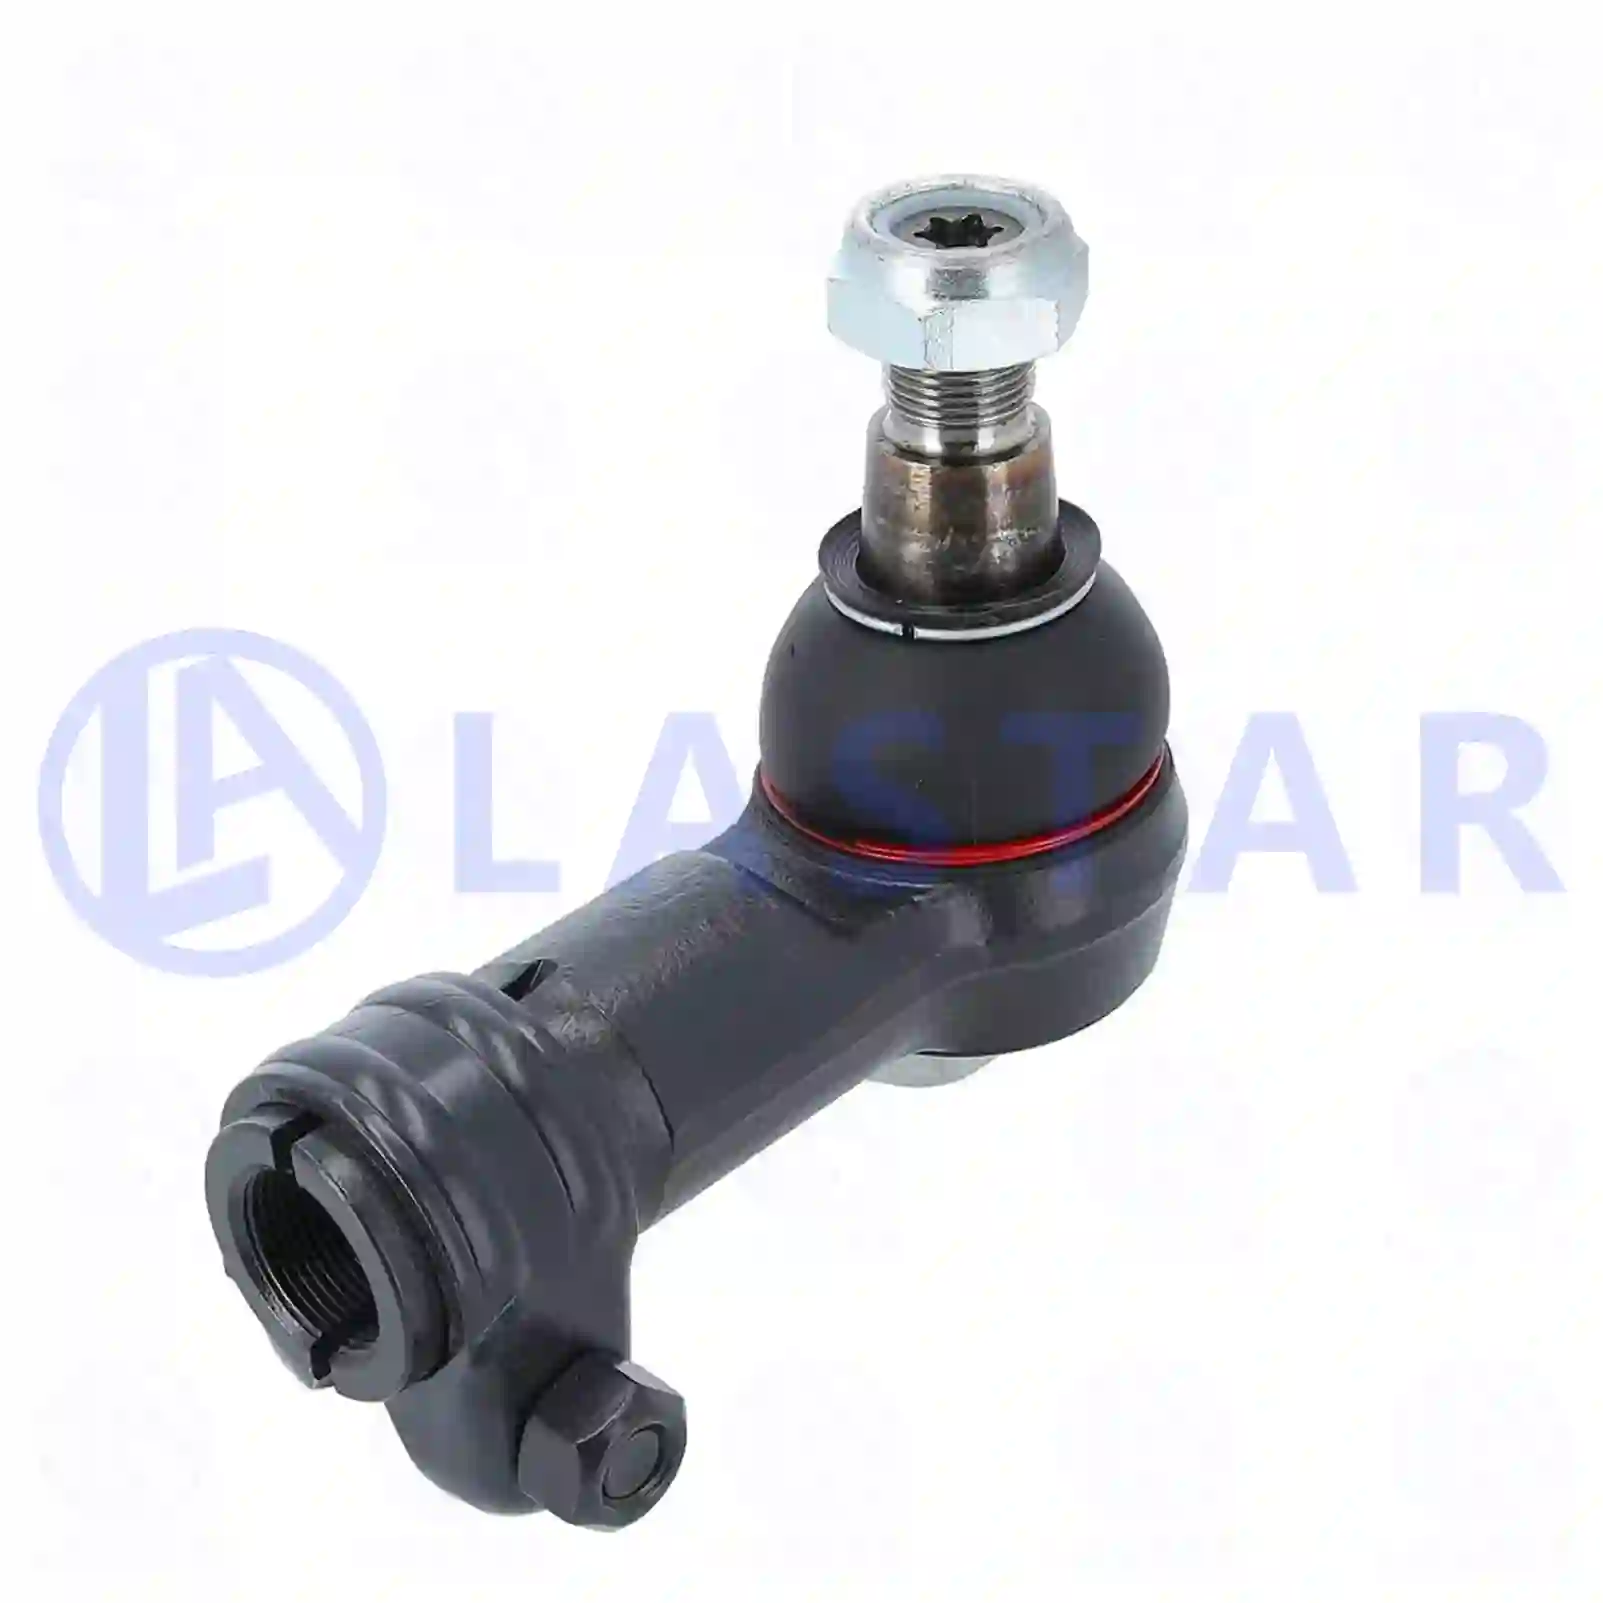 Ball joint, 77705262, 21431678 ||  77705262 Lastar Spare Part | Truck Spare Parts, Auotomotive Spare Parts Ball joint, 77705262, 21431678 ||  77705262 Lastar Spare Part | Truck Spare Parts, Auotomotive Spare Parts